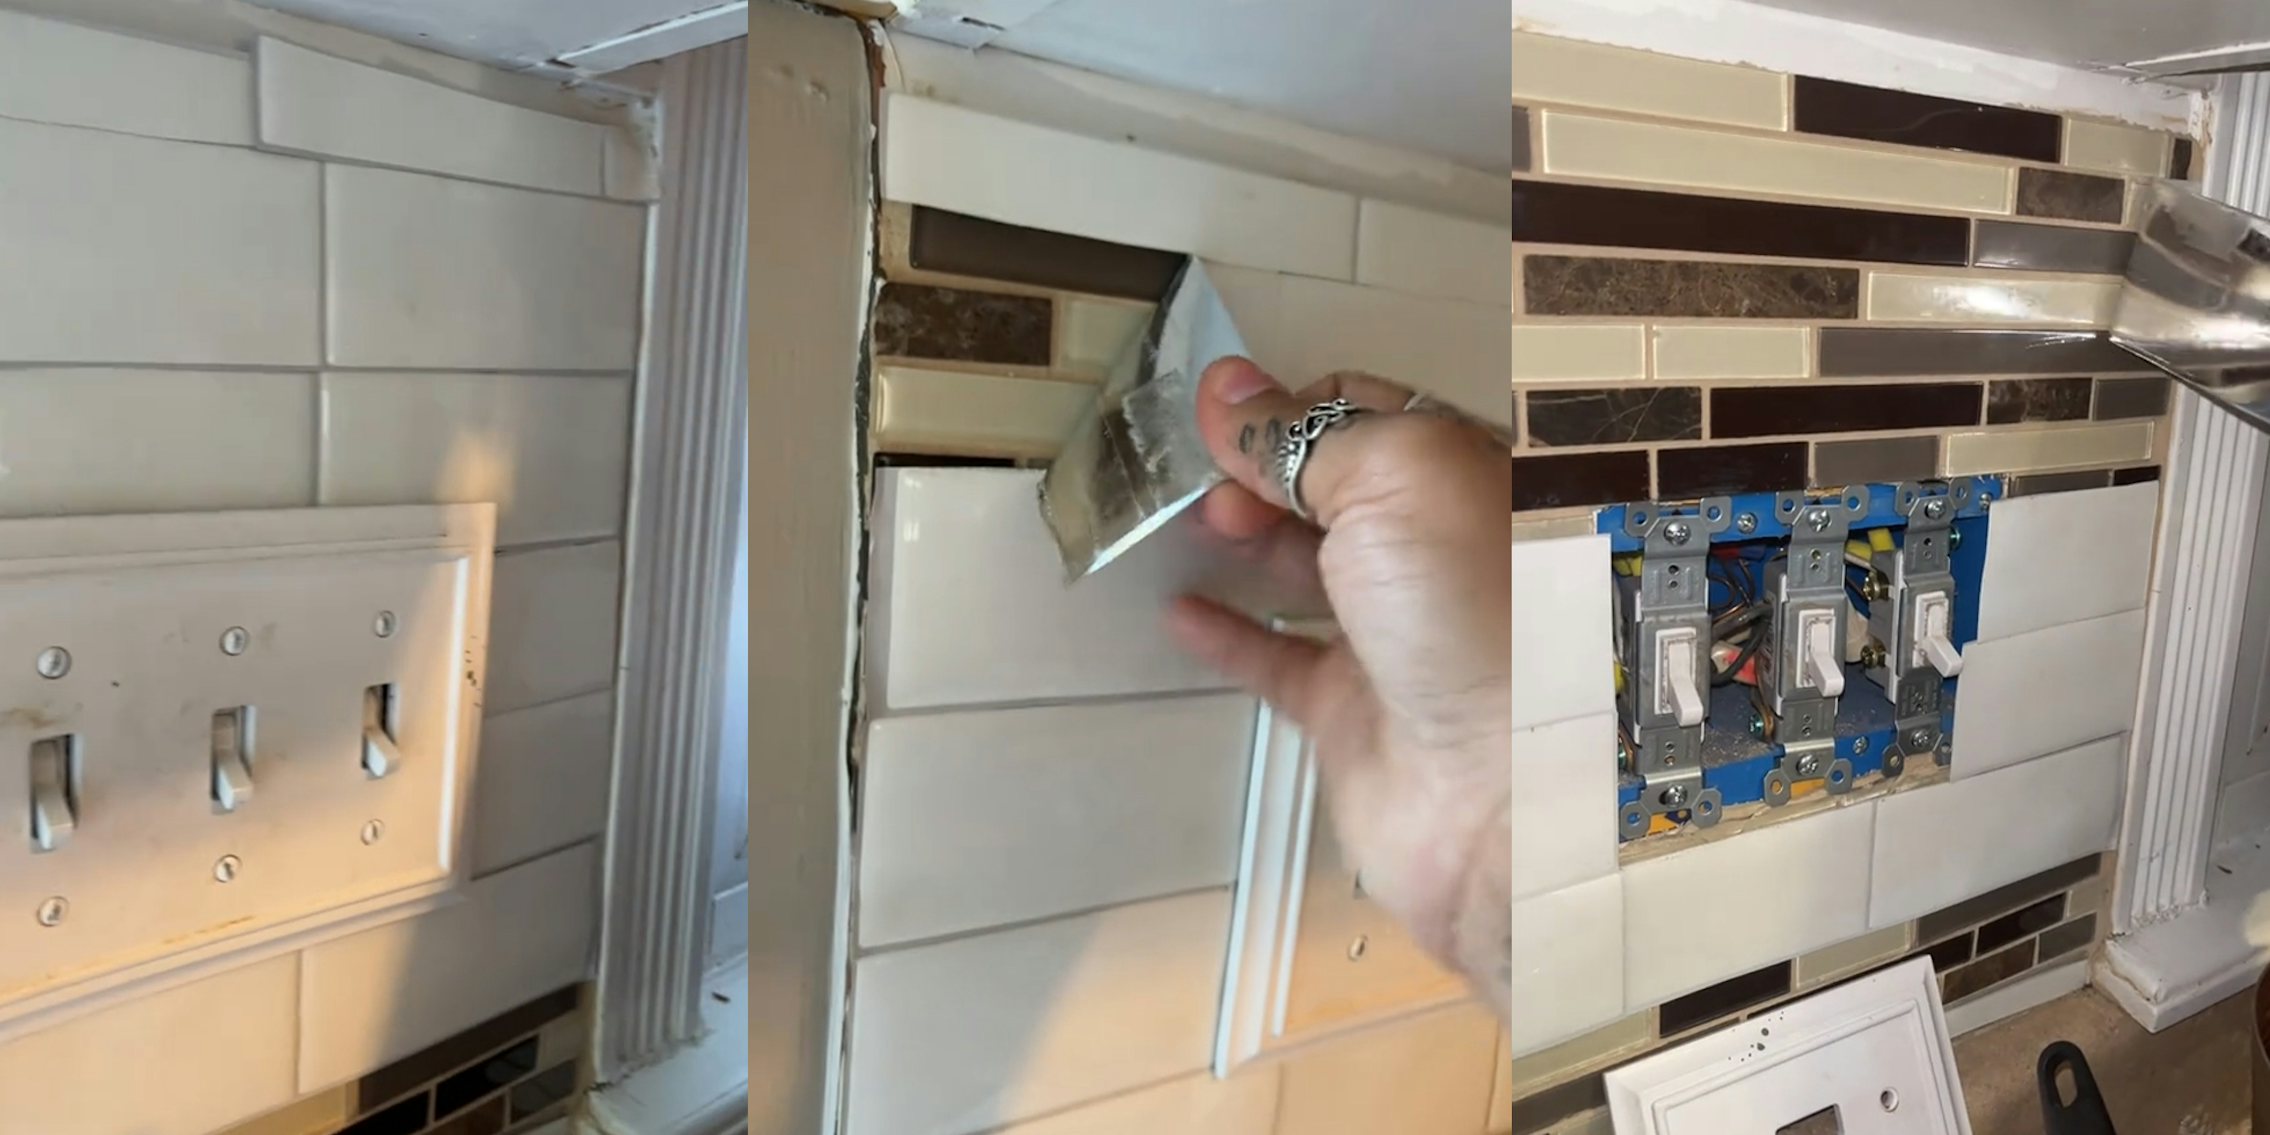 Woman finds out kitchen has peel-and-stick backsplash—two years after living in house